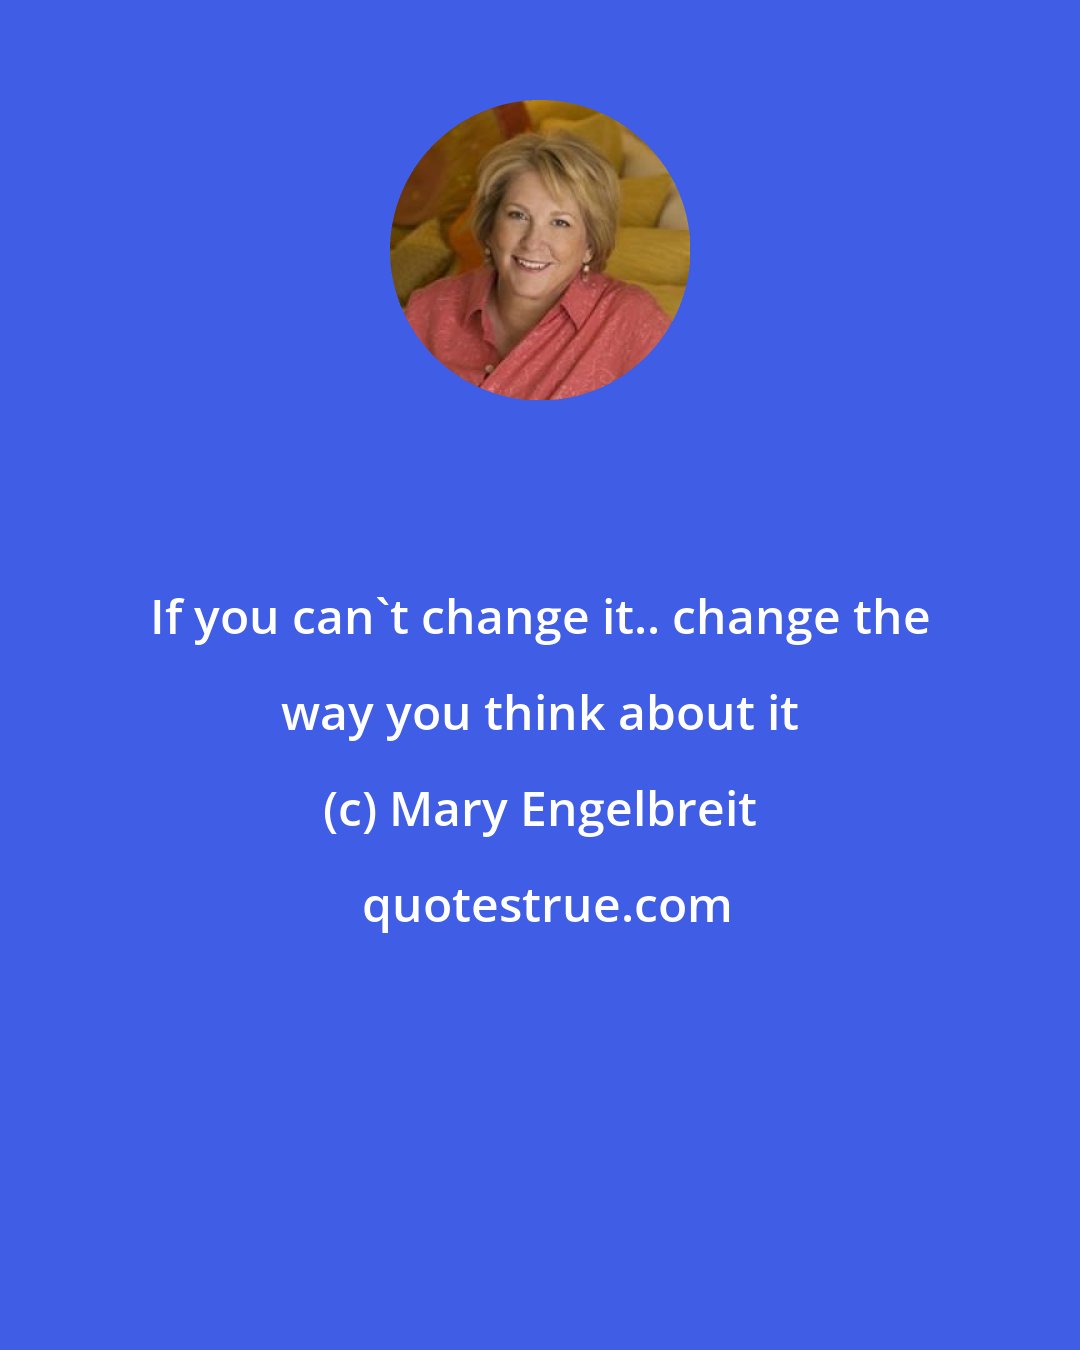 Mary Engelbreit: If you can't change it.. change the way you think about it